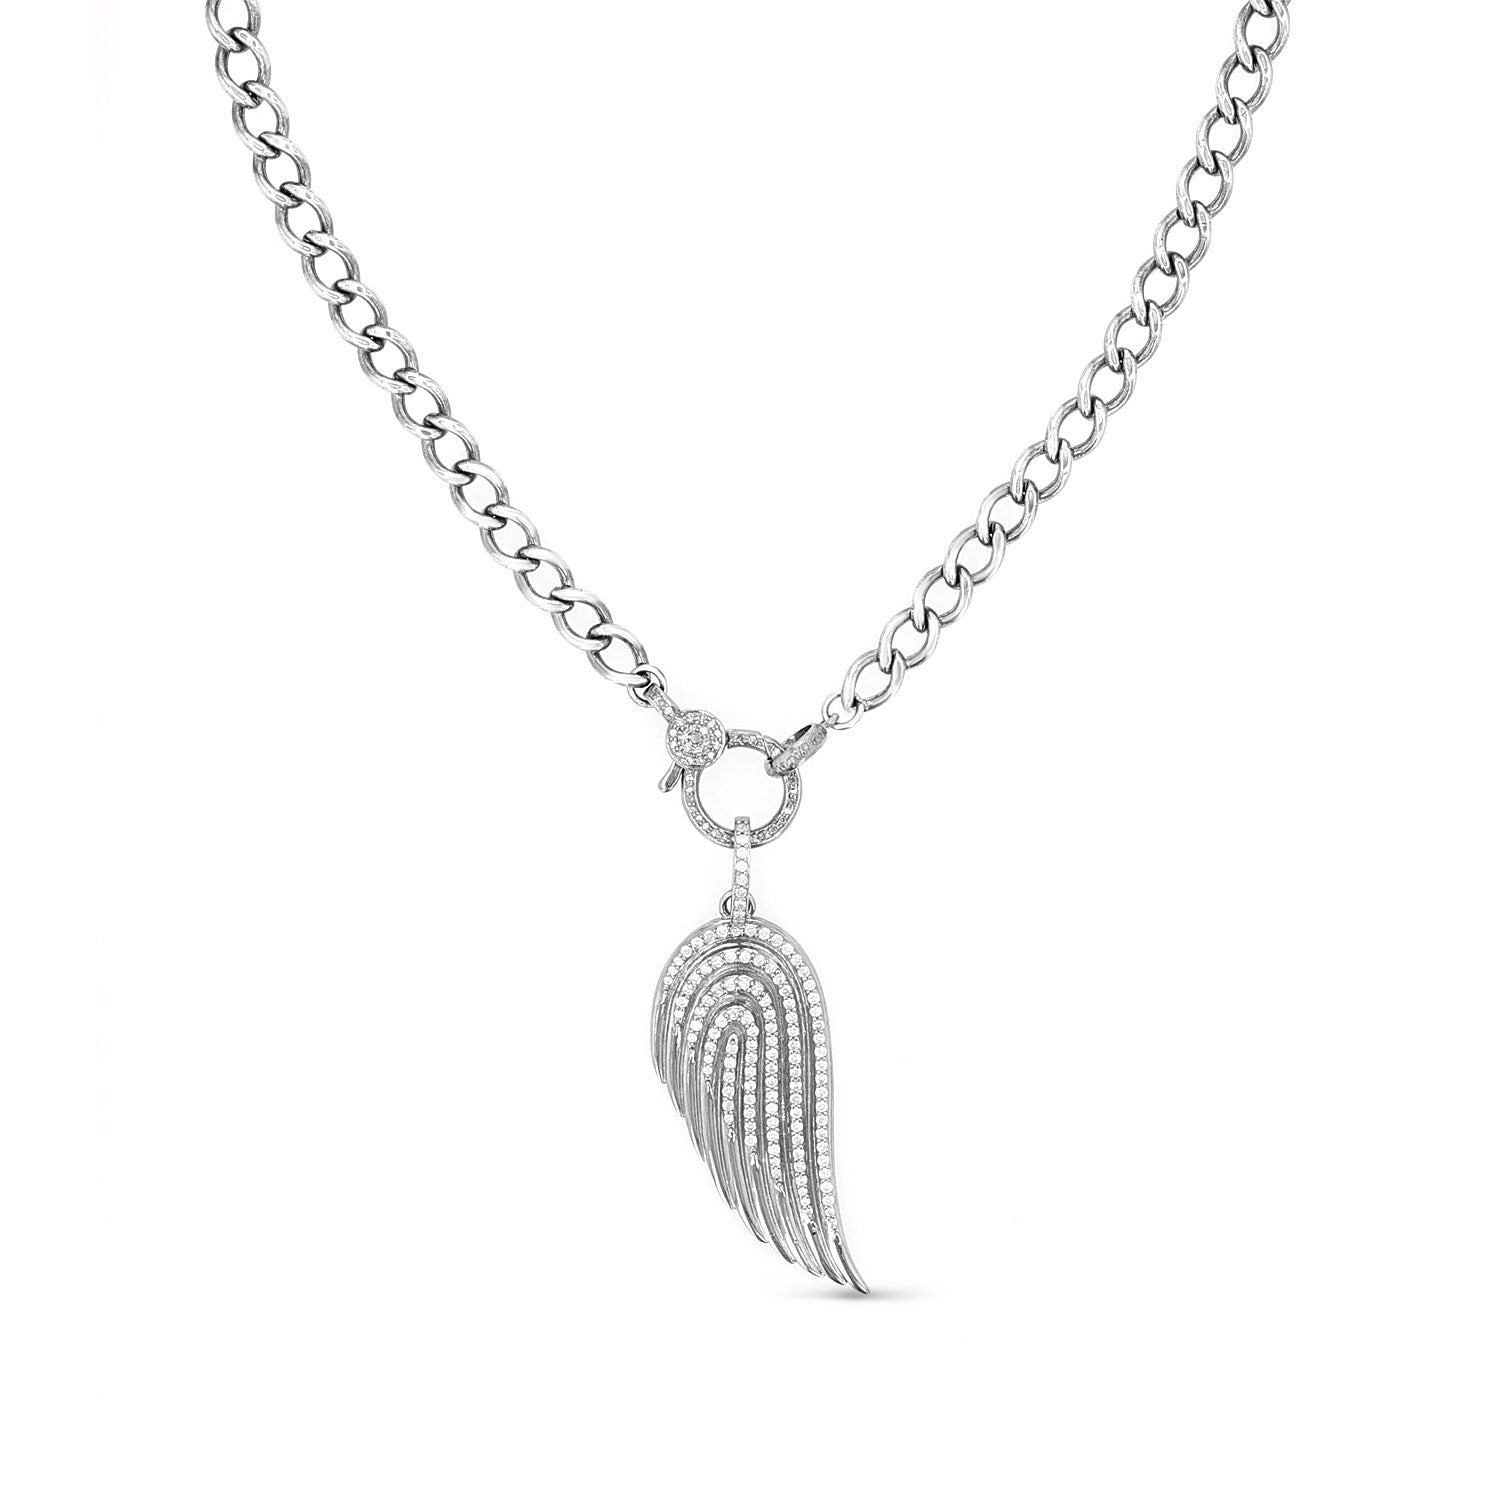 Diamond Angel Wing Pendant on Curb Chain Necklace - 17"  N0003357 - TBird